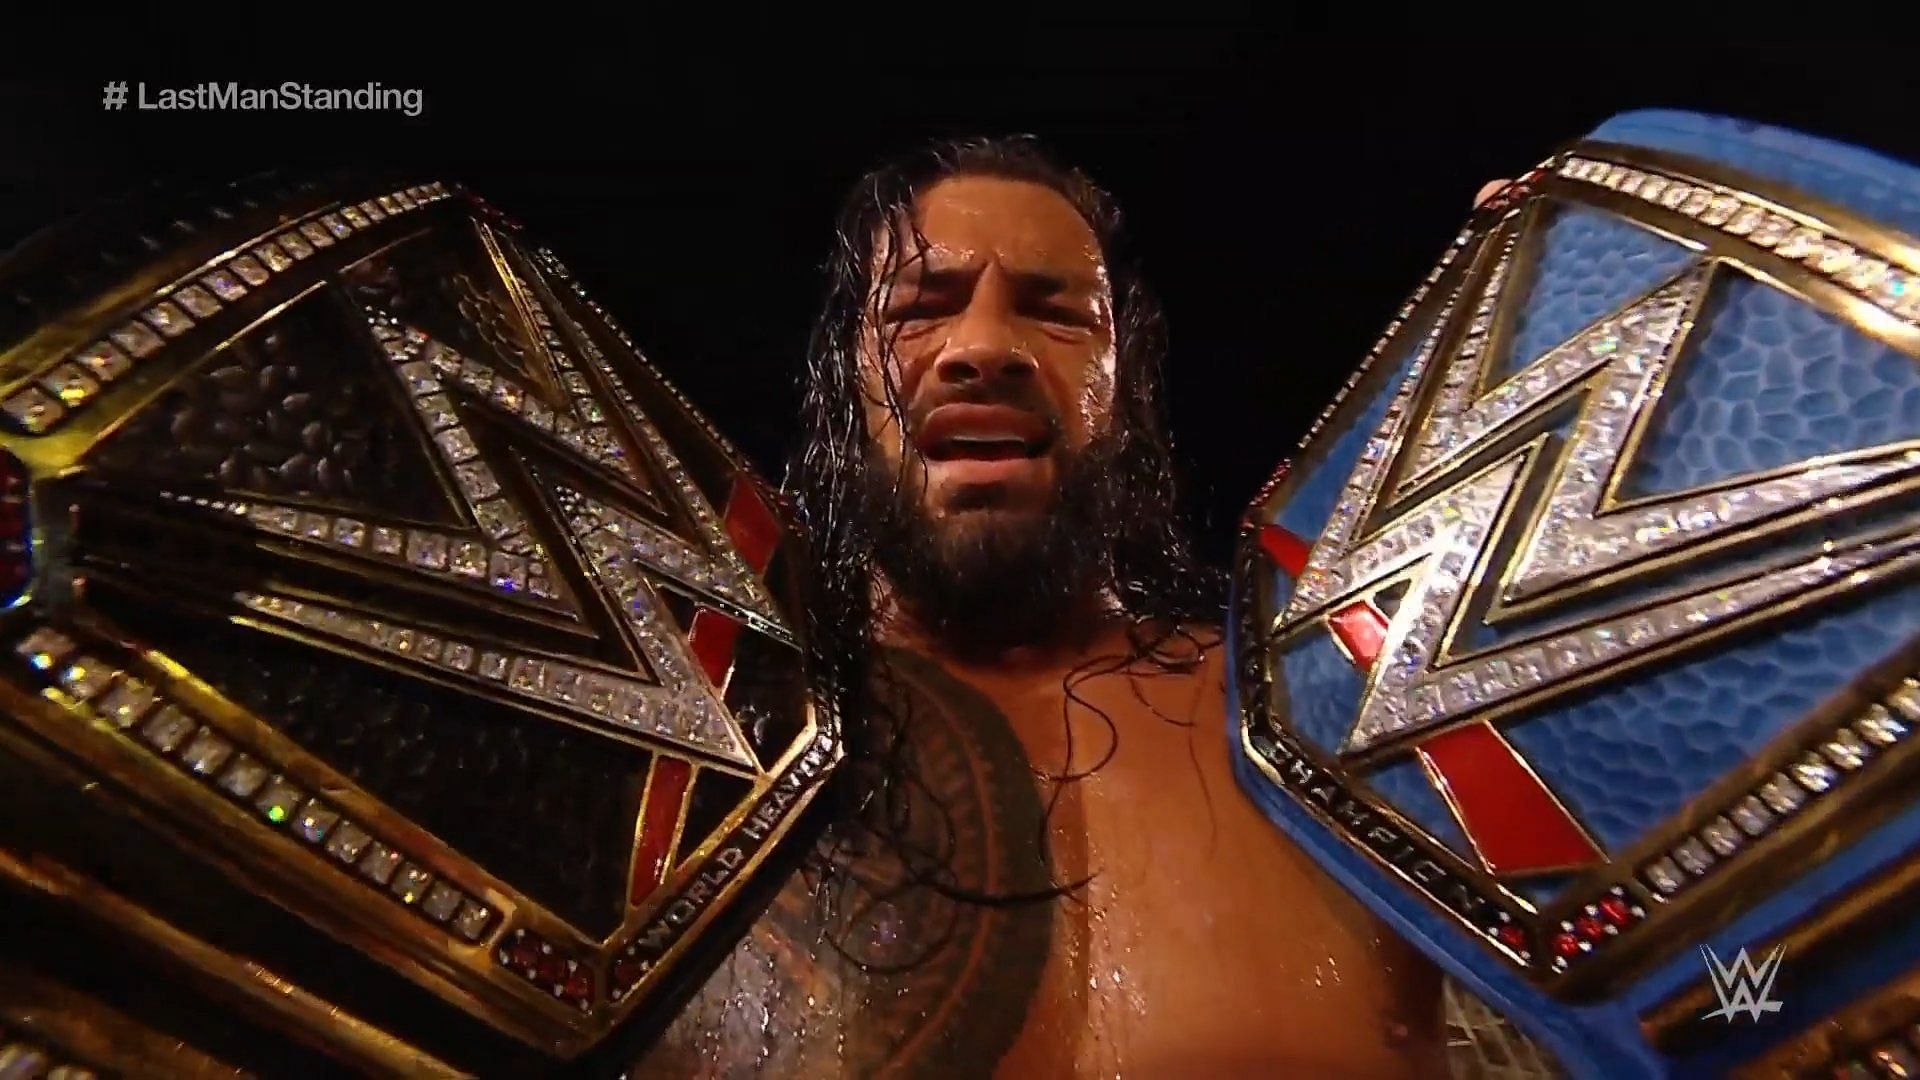 Roman Reigns is the WWE Undisputed Universal Champion